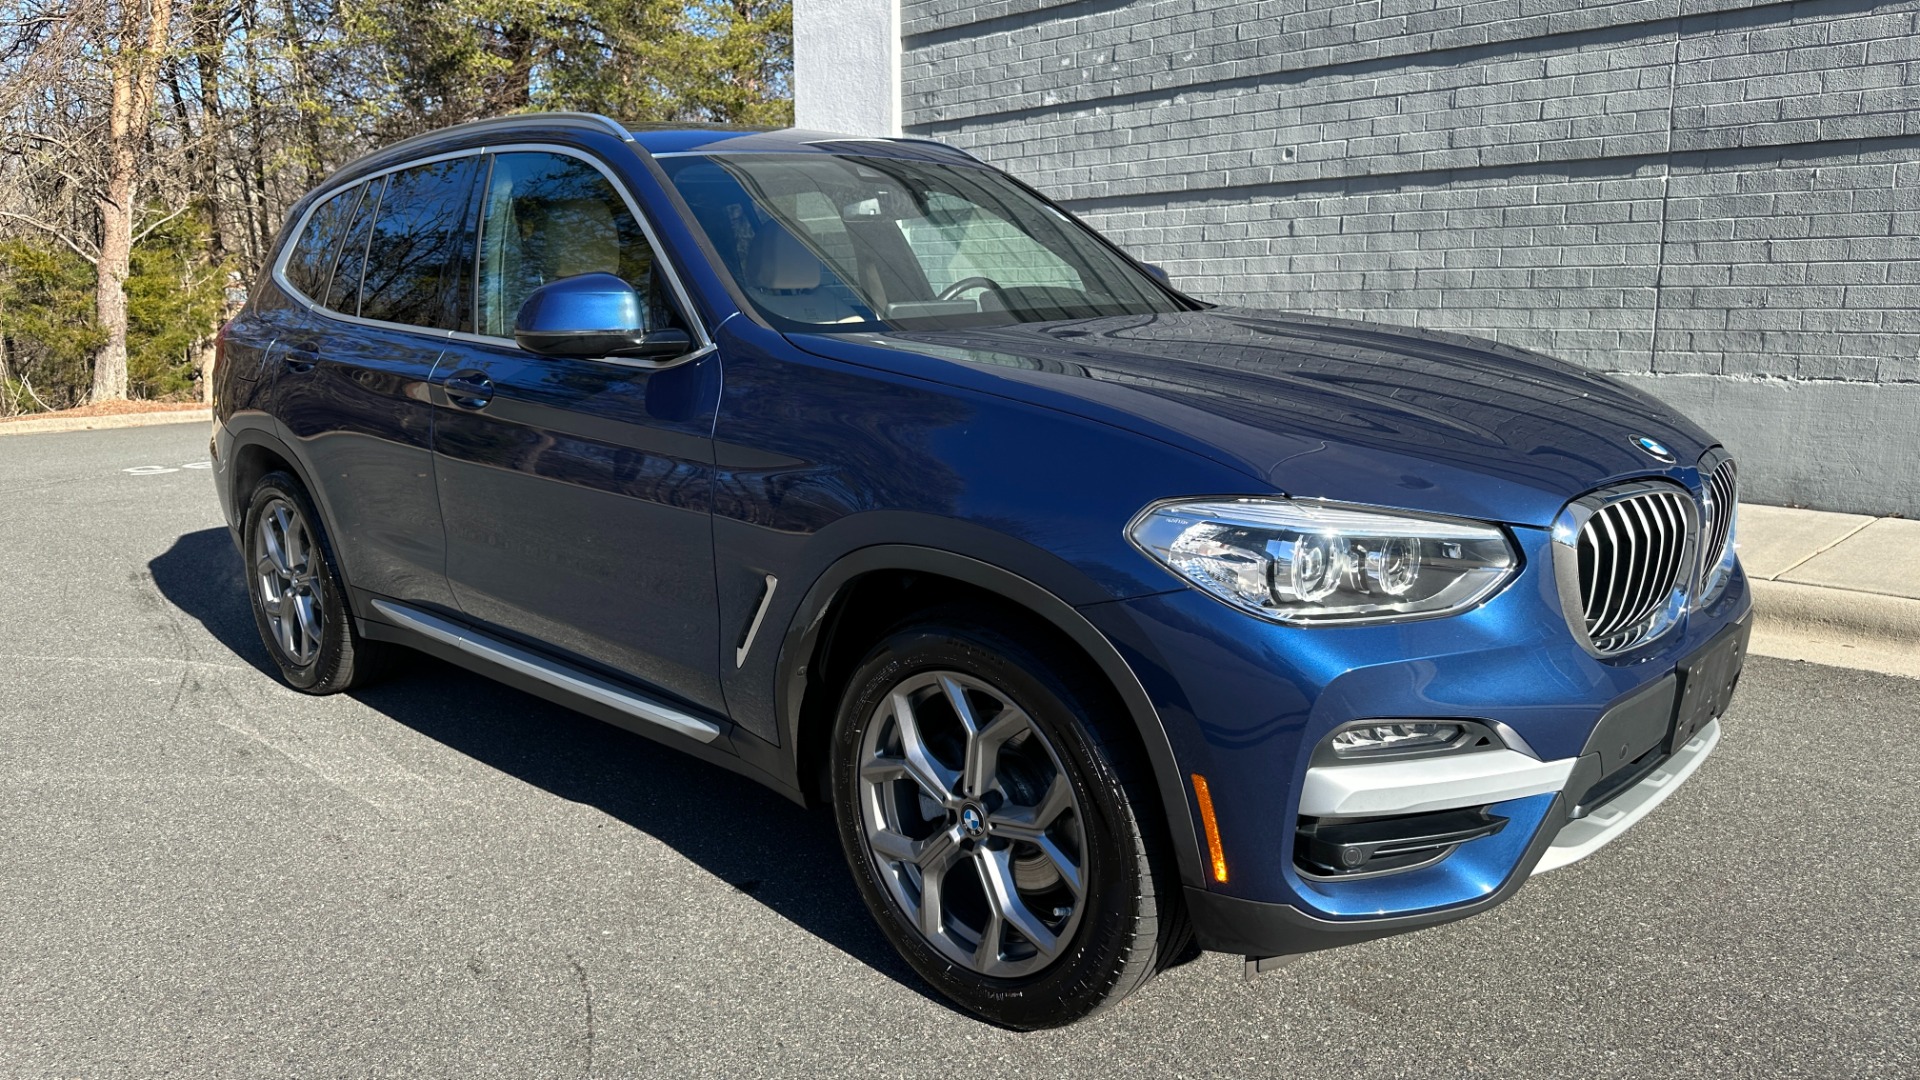 Used 2020 BMW X3 xDrive30i / DRIVER ASSISTANCE / HEATED SEATS / HEATED STEERING / NAV / COCK for sale $29,995 at Formula Imports in Charlotte NC 28227 2